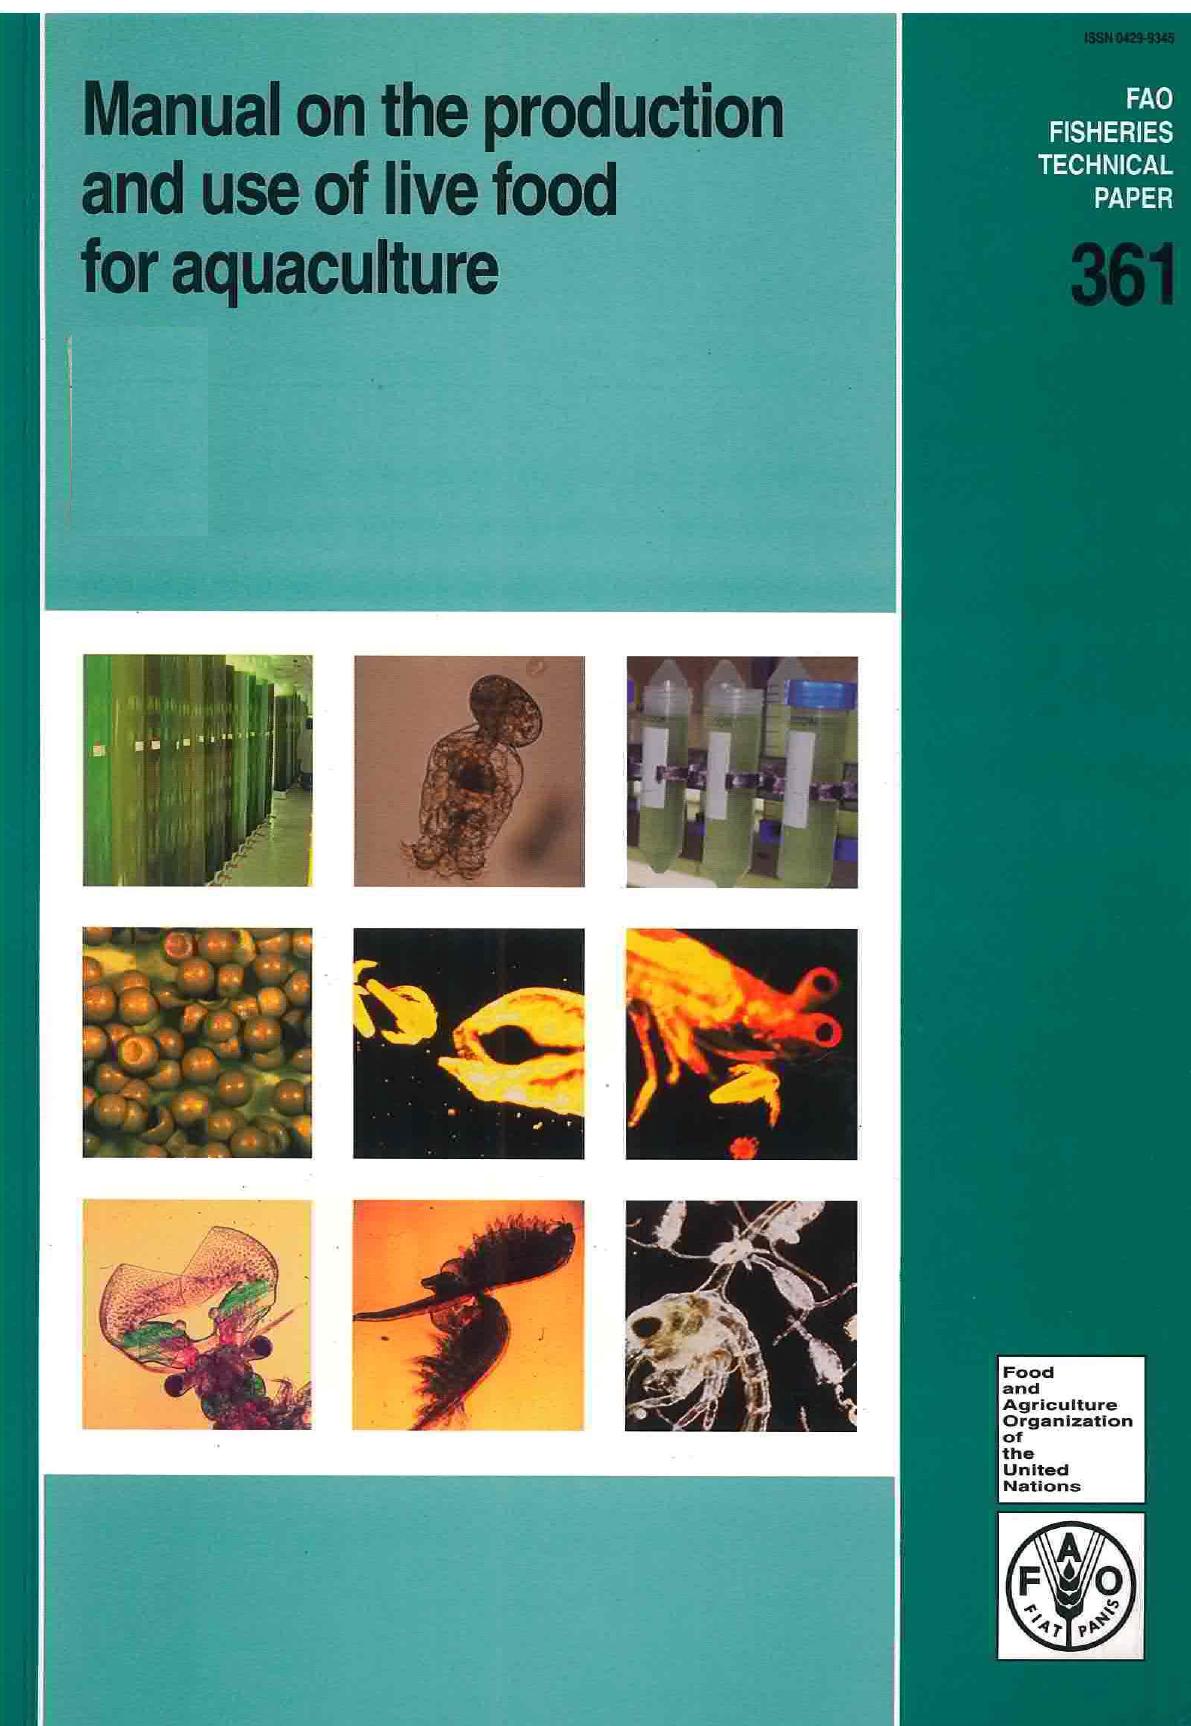 FAO Fisheries Technical Paper. No. 361. Manual on the production and use of live food for aquaculture